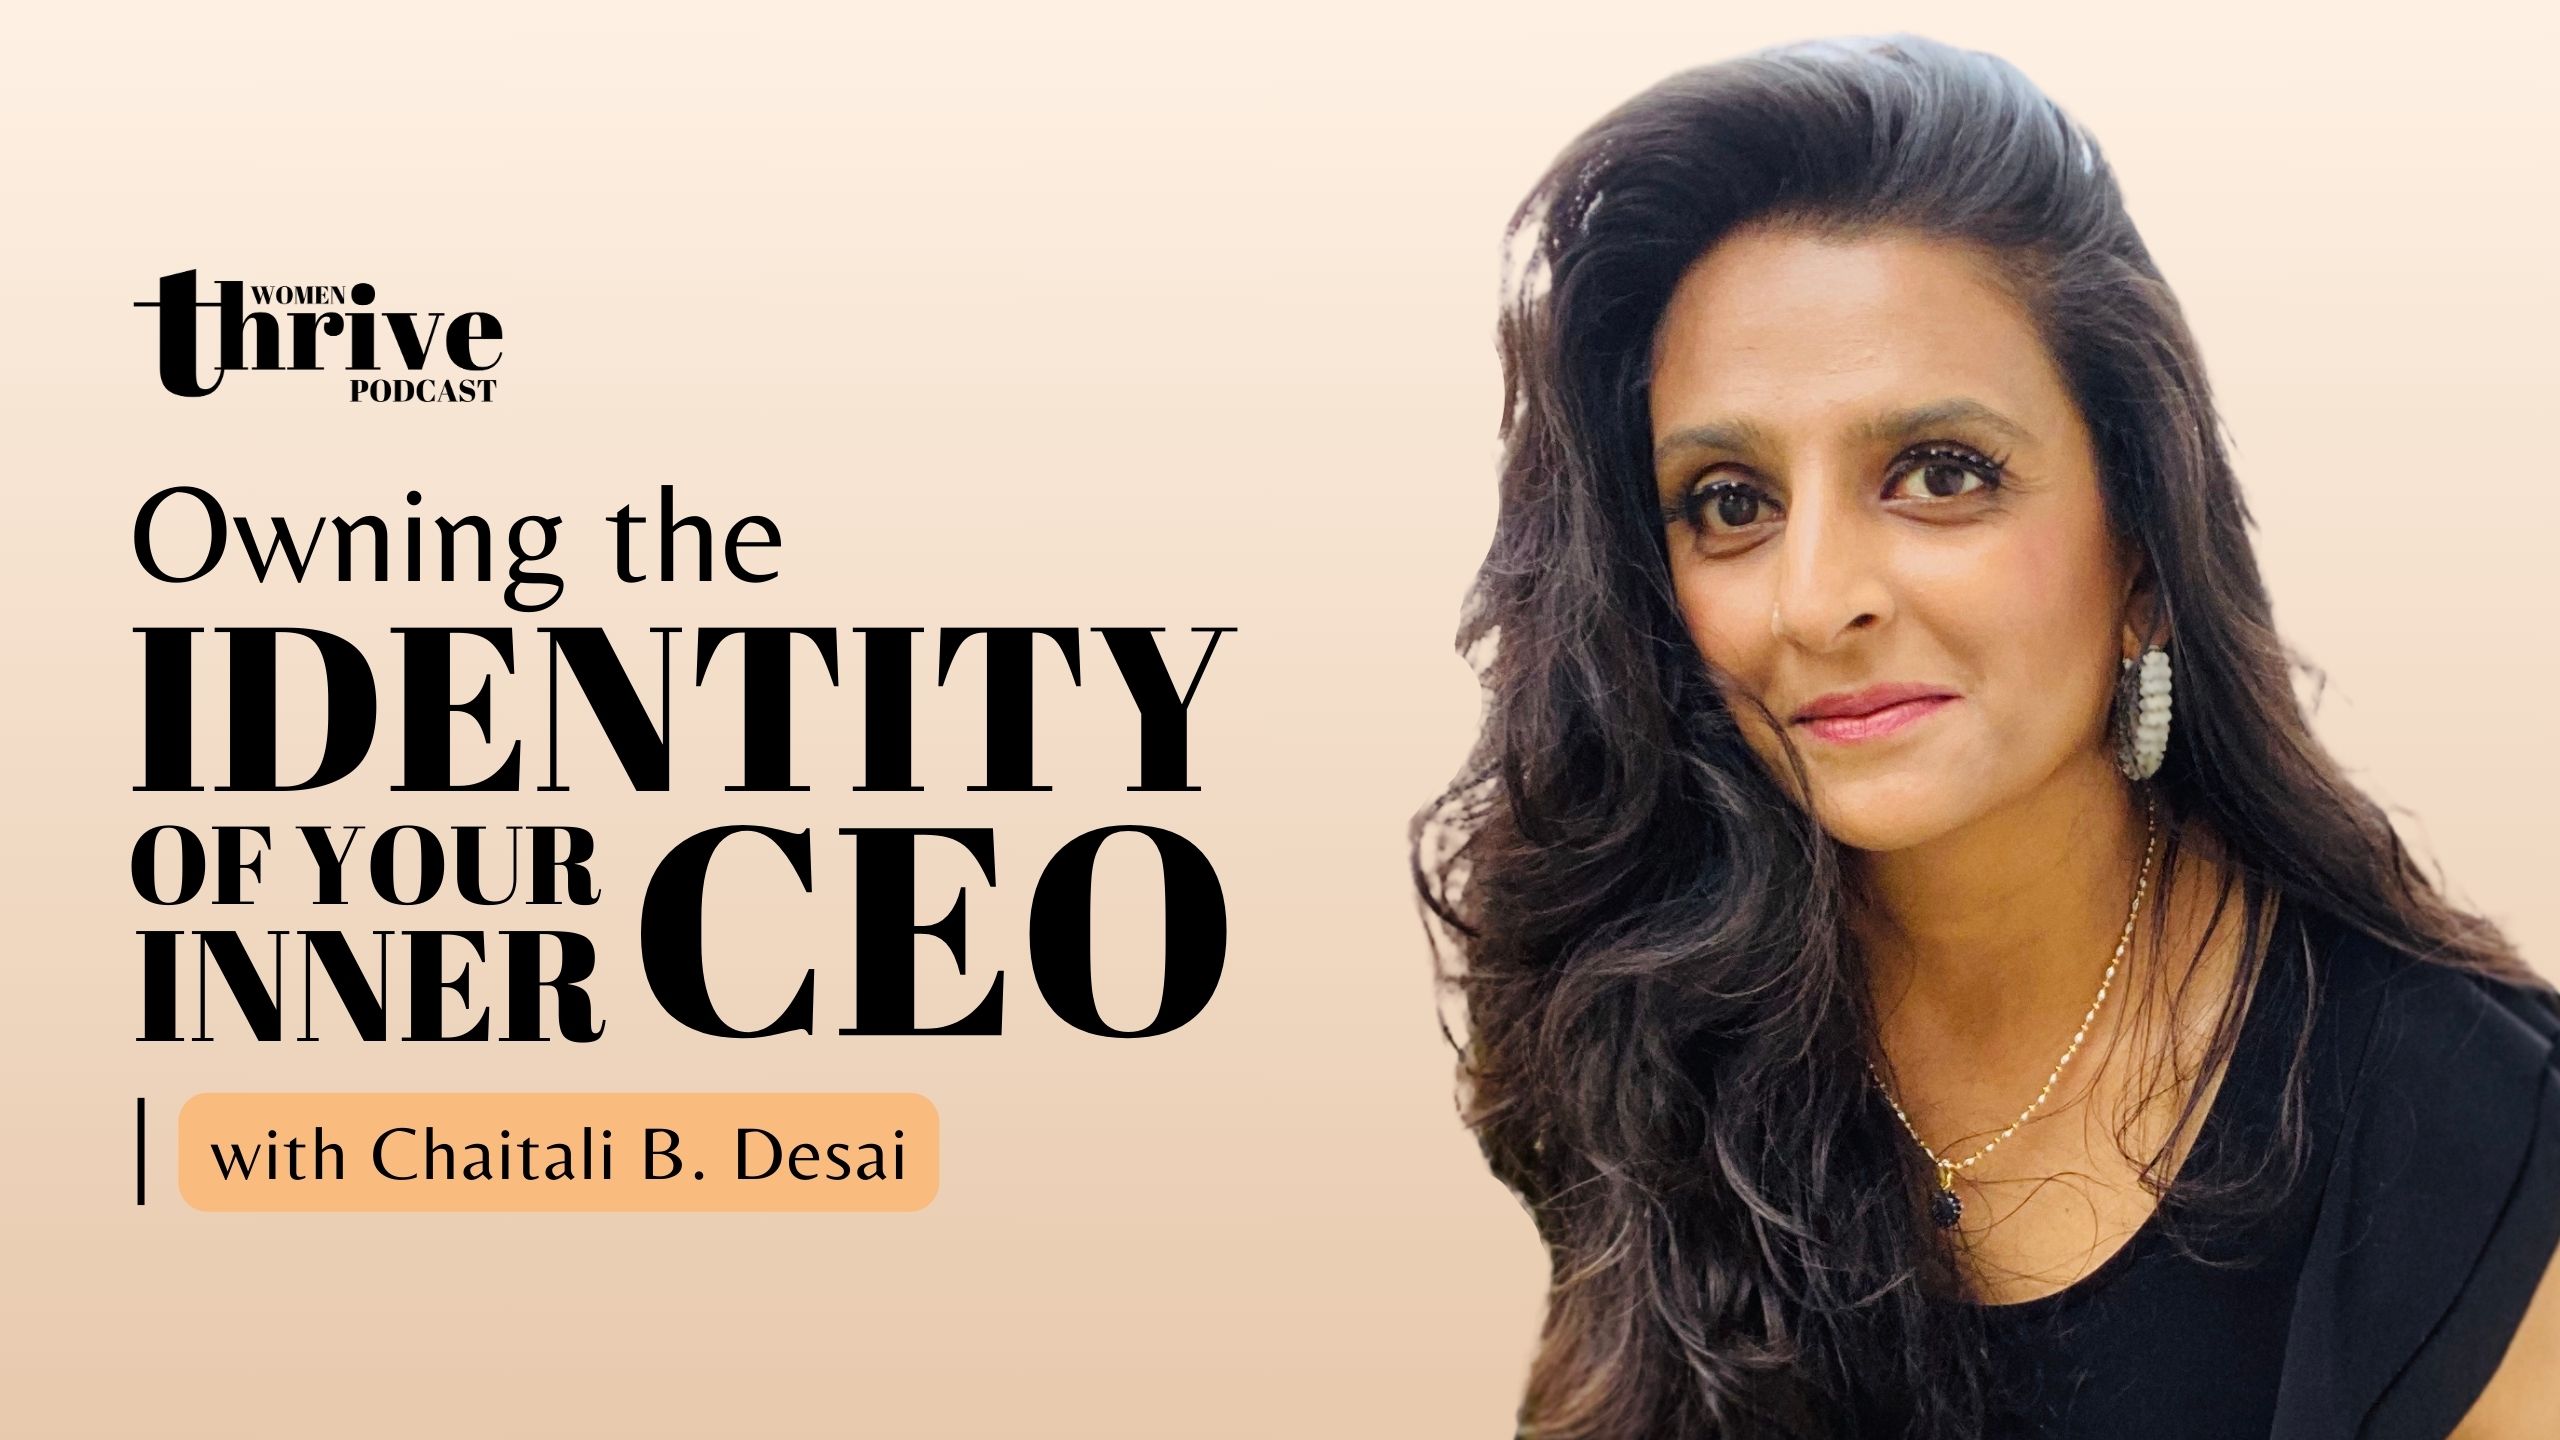 Owning the Identity of Your Inner CEO with Chaitali B. Desai